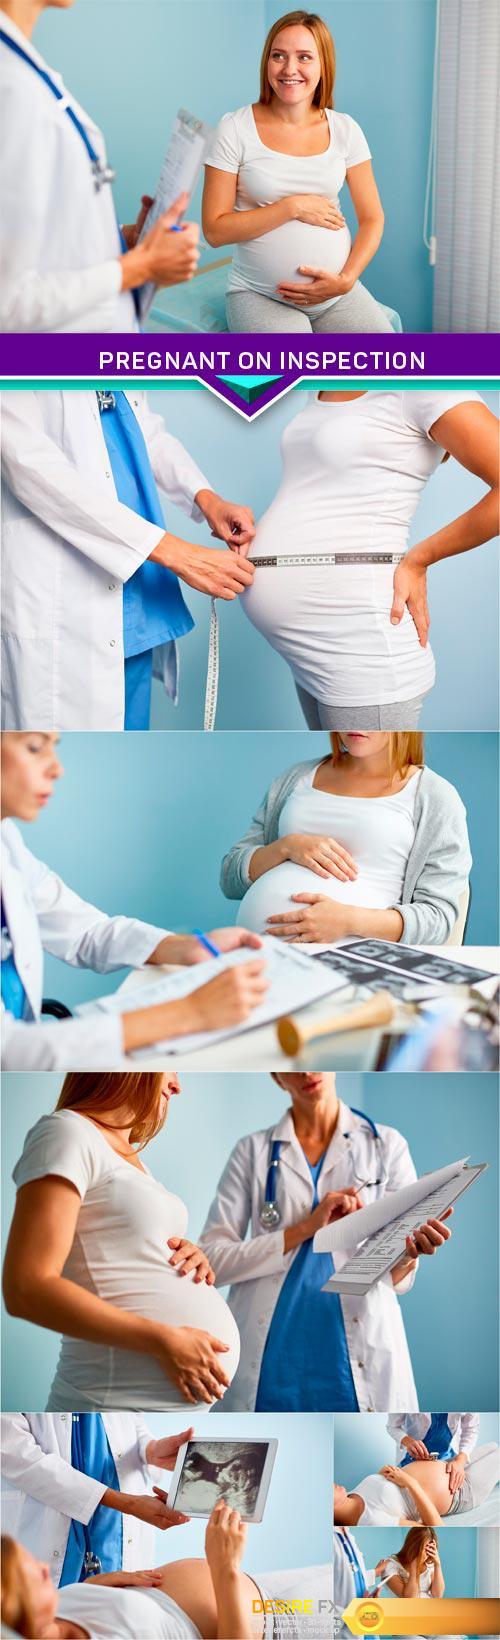 Consultant obstetrician pregnant on inspection 7X JPEG